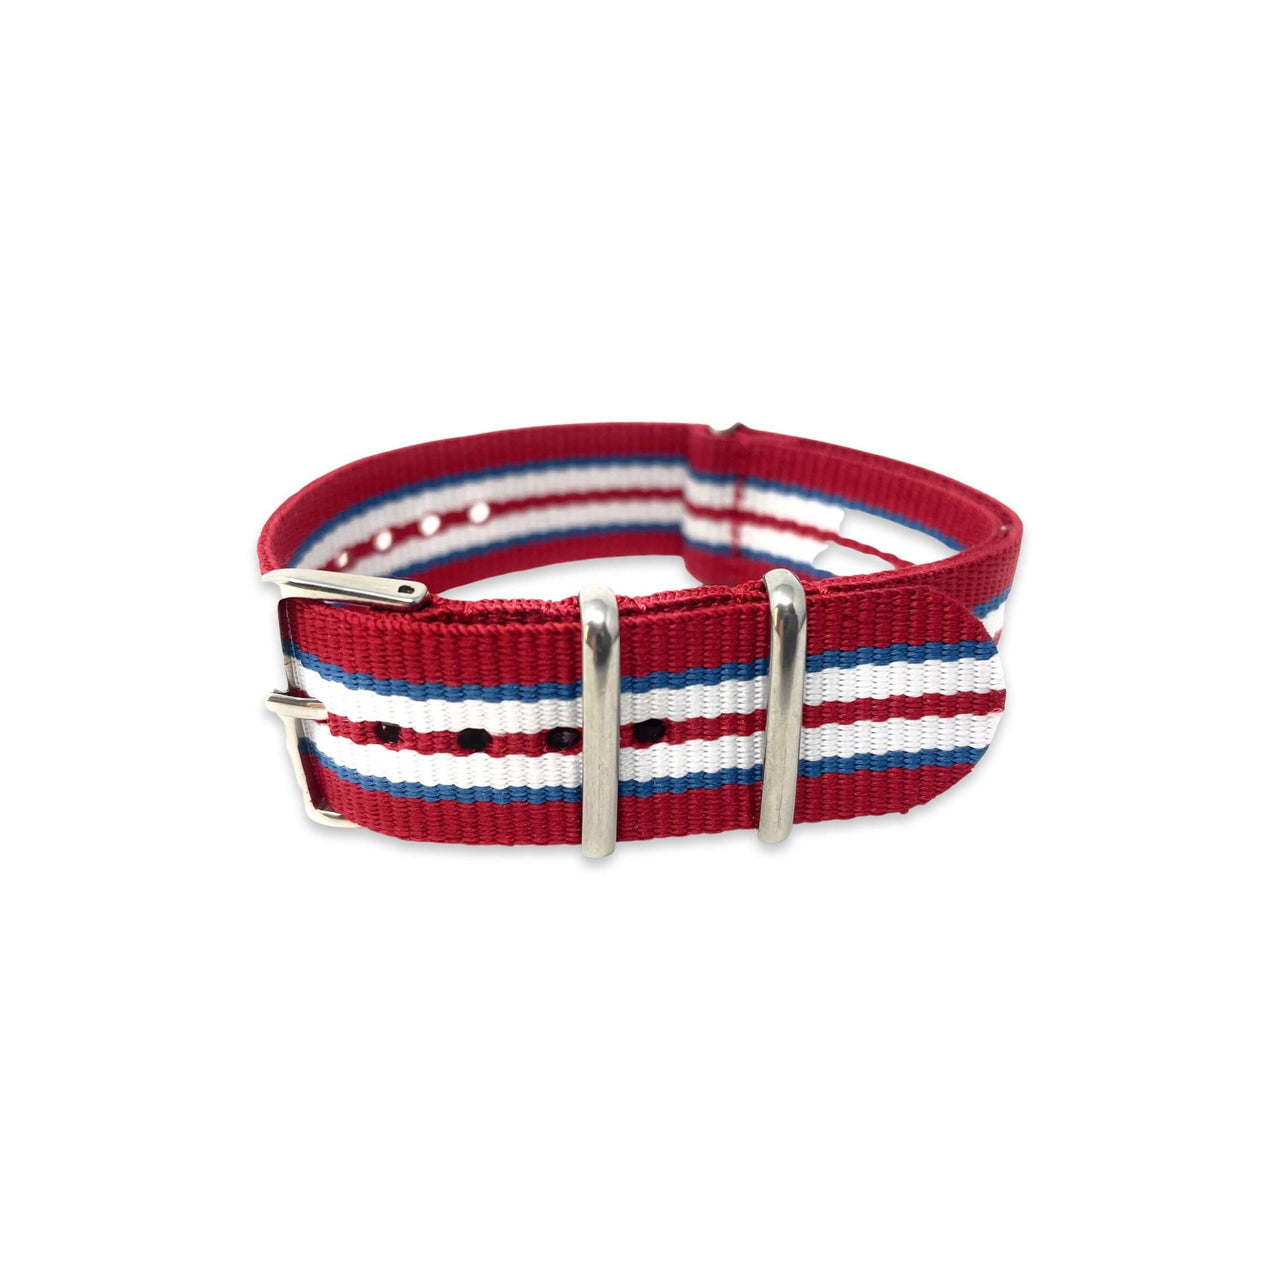 Classic Military Style Strap - Red, Blue & White